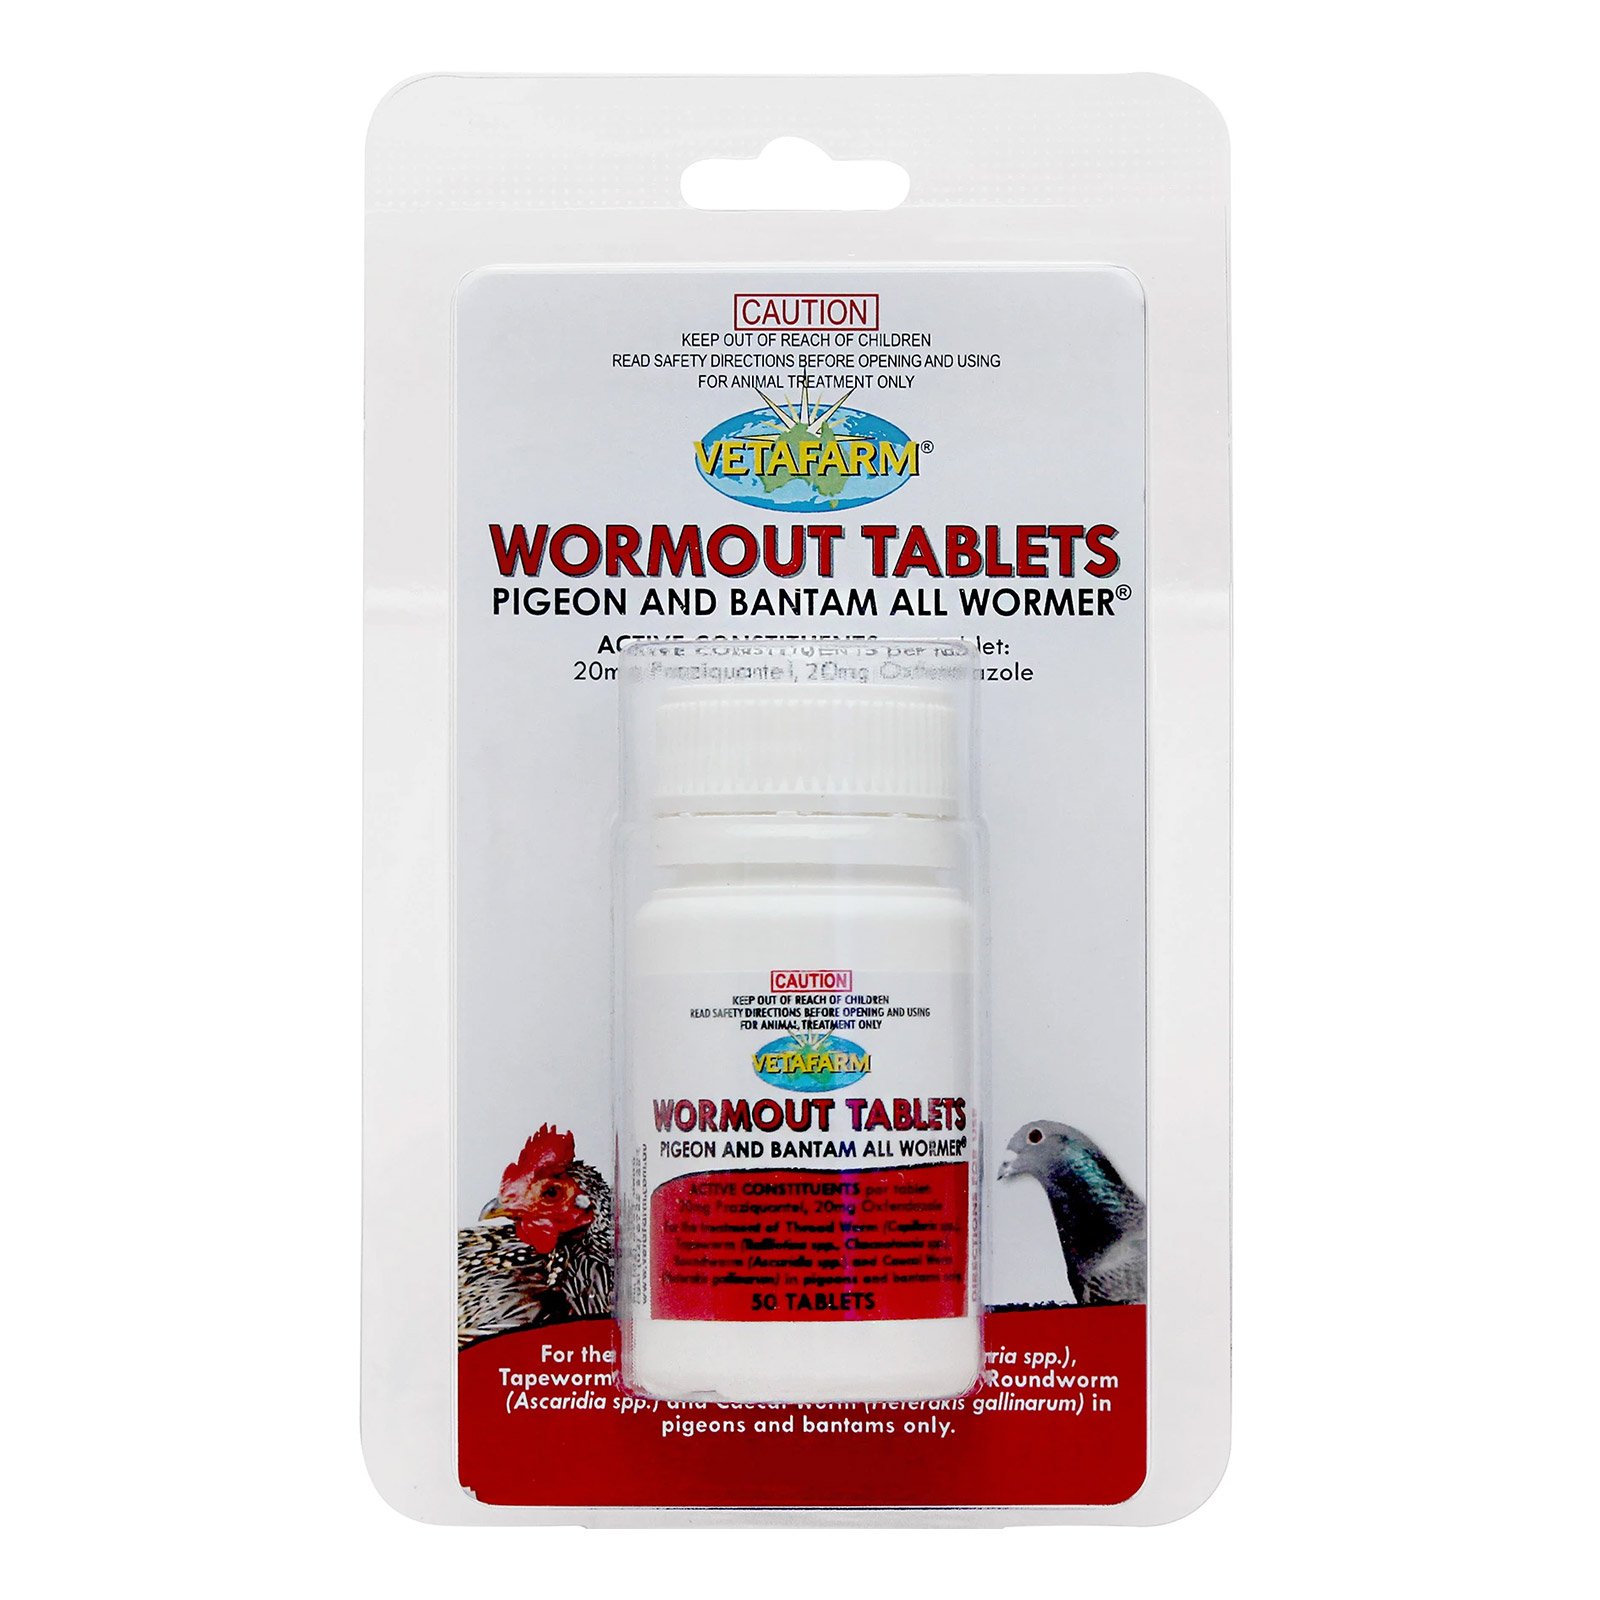 VetaFarm Wormout Tablets for Pigeons and Bantams